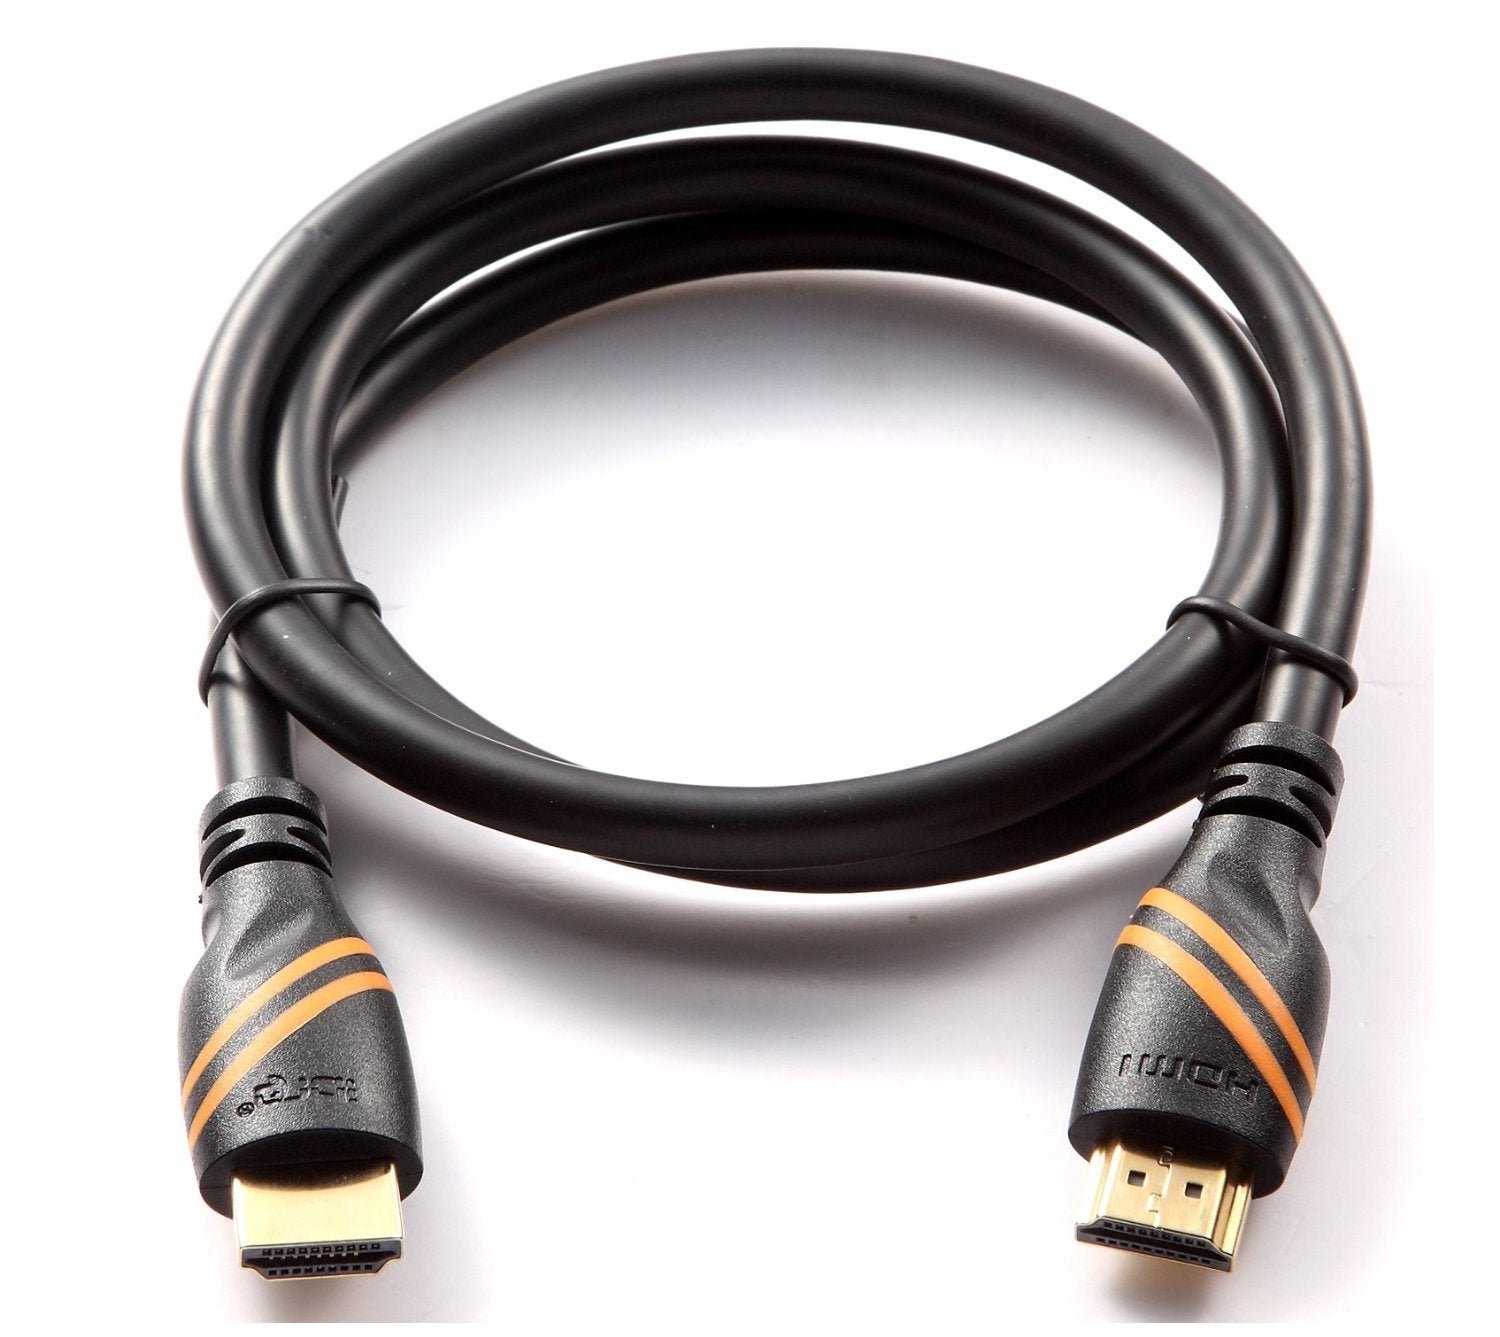 HDMI Cable IBRA HDMI Lead - 2M 4K@60hz HDMI 2.0 Cable Ultra High Speed 18Gbps Support Ethernet, Audio Return Channel, Video 4K UHD 2160p, HD 1080p, 3D, Xbox, PS3, PS4, PC, Samsung TV, Apple TV -Black